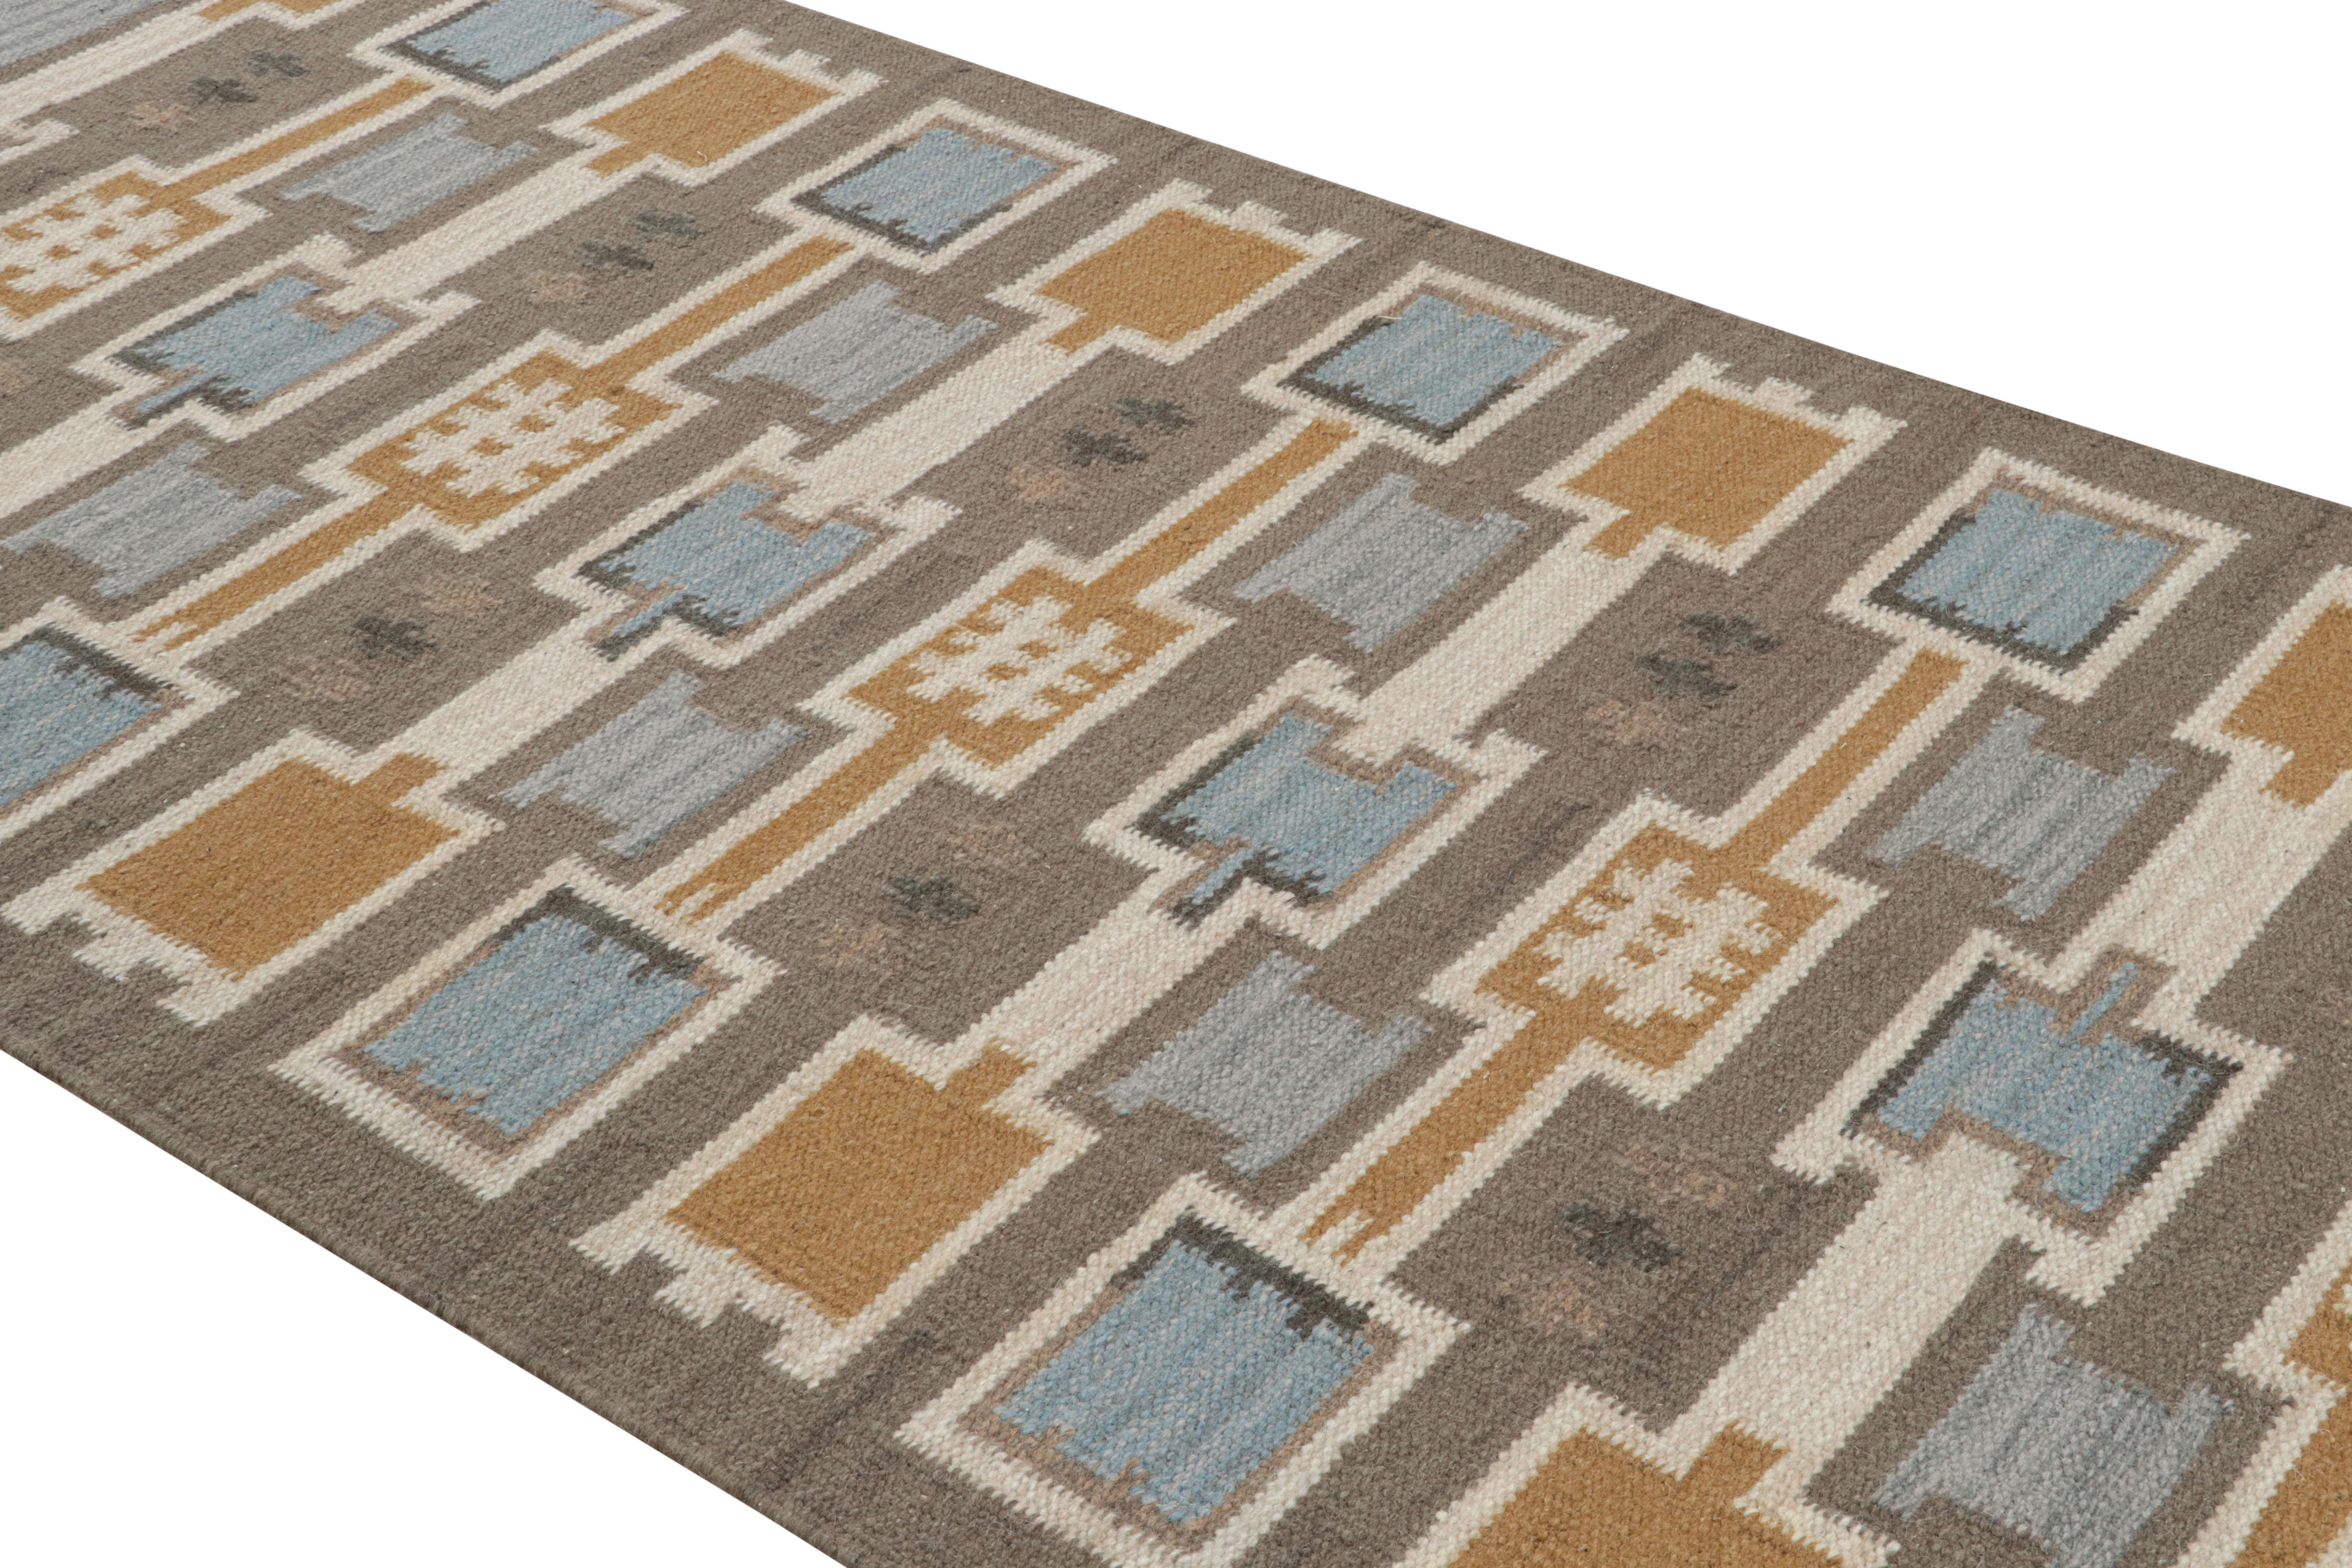 A bold new addition to Rug & Kilim’s Scandinavian Collection, this handwoven 4x14 rug reflects a contemporary take on mid-century Rollakans and Swedish Deco style.
On the Design:
This new flat weave reinvents vintage Scandinavian Kilim in ways that